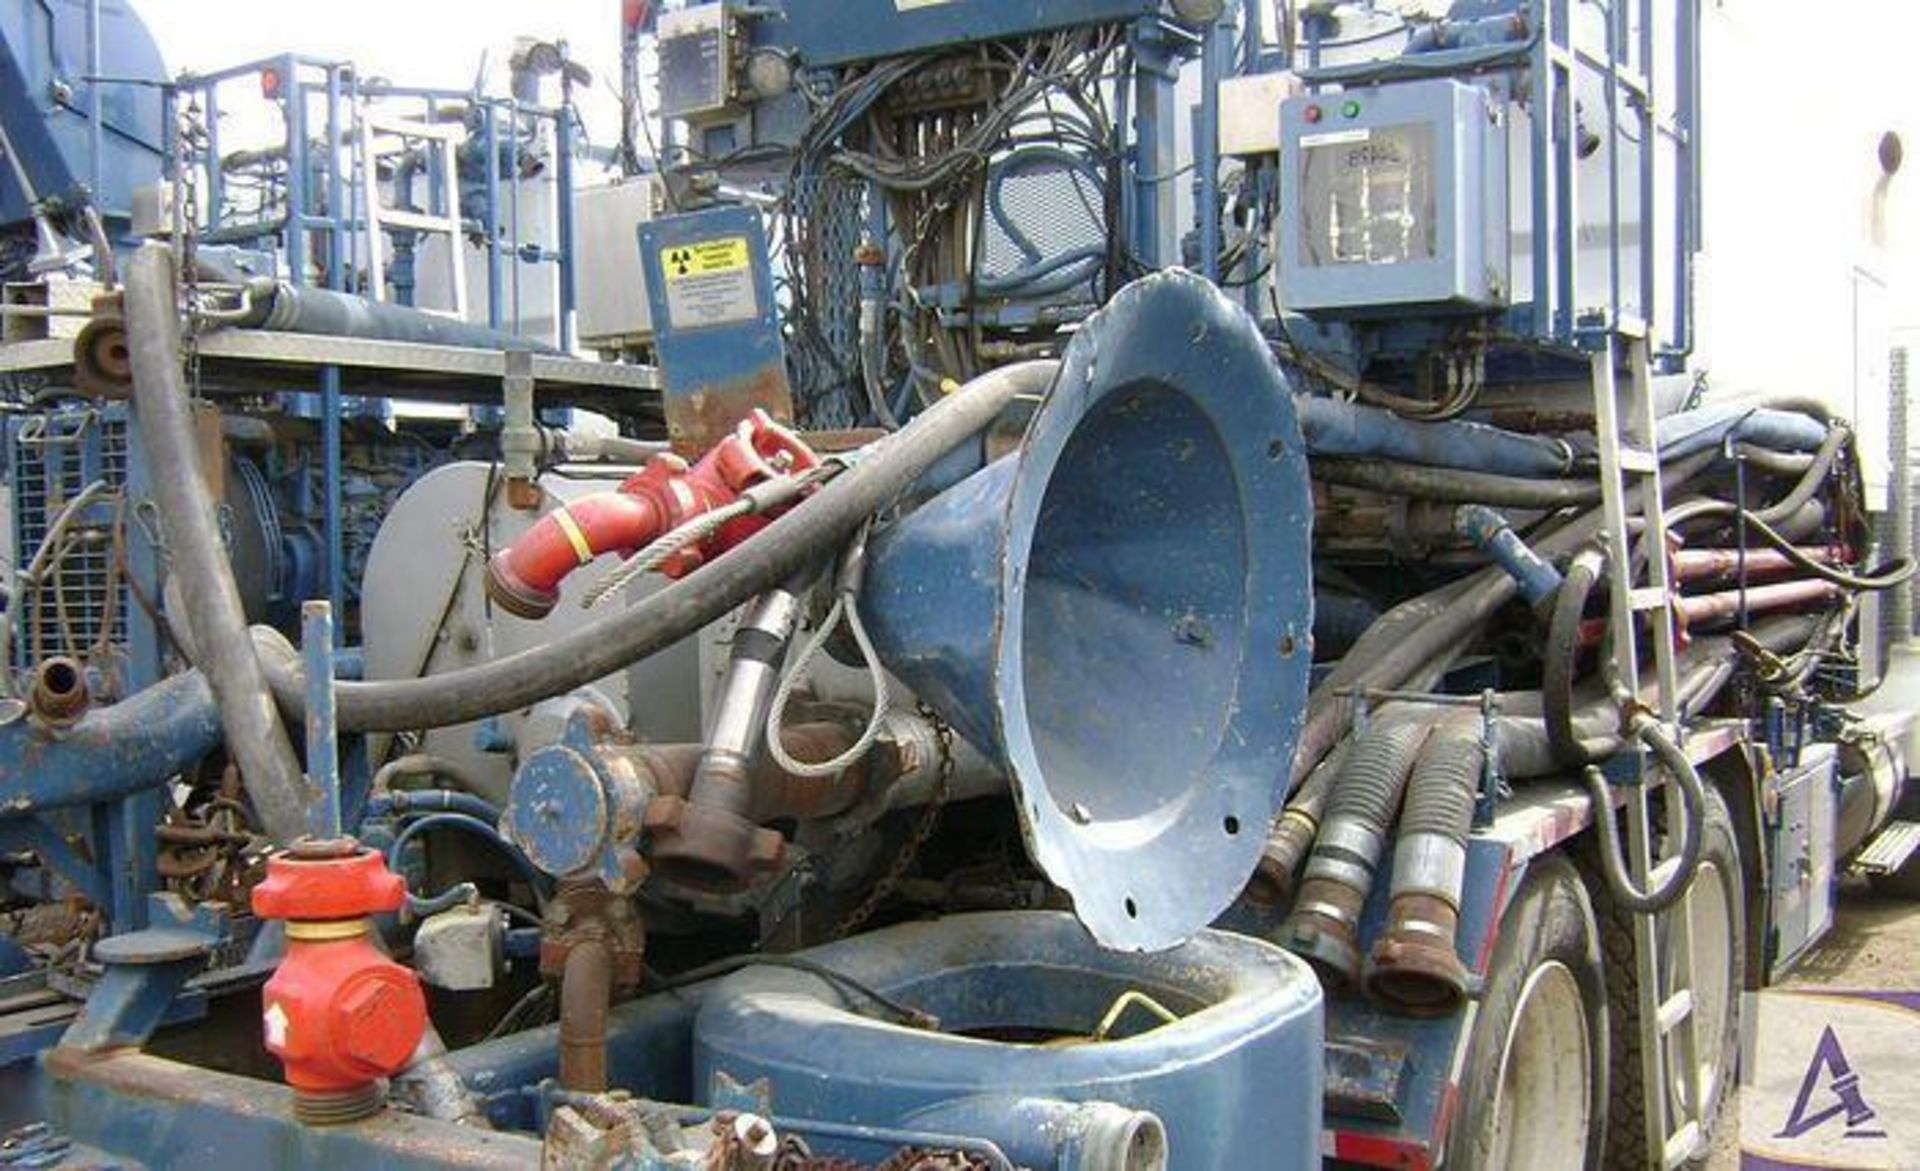 2001 Kenworth T800 T/A Body Load Cement Pump Truck - Image 3 of 5